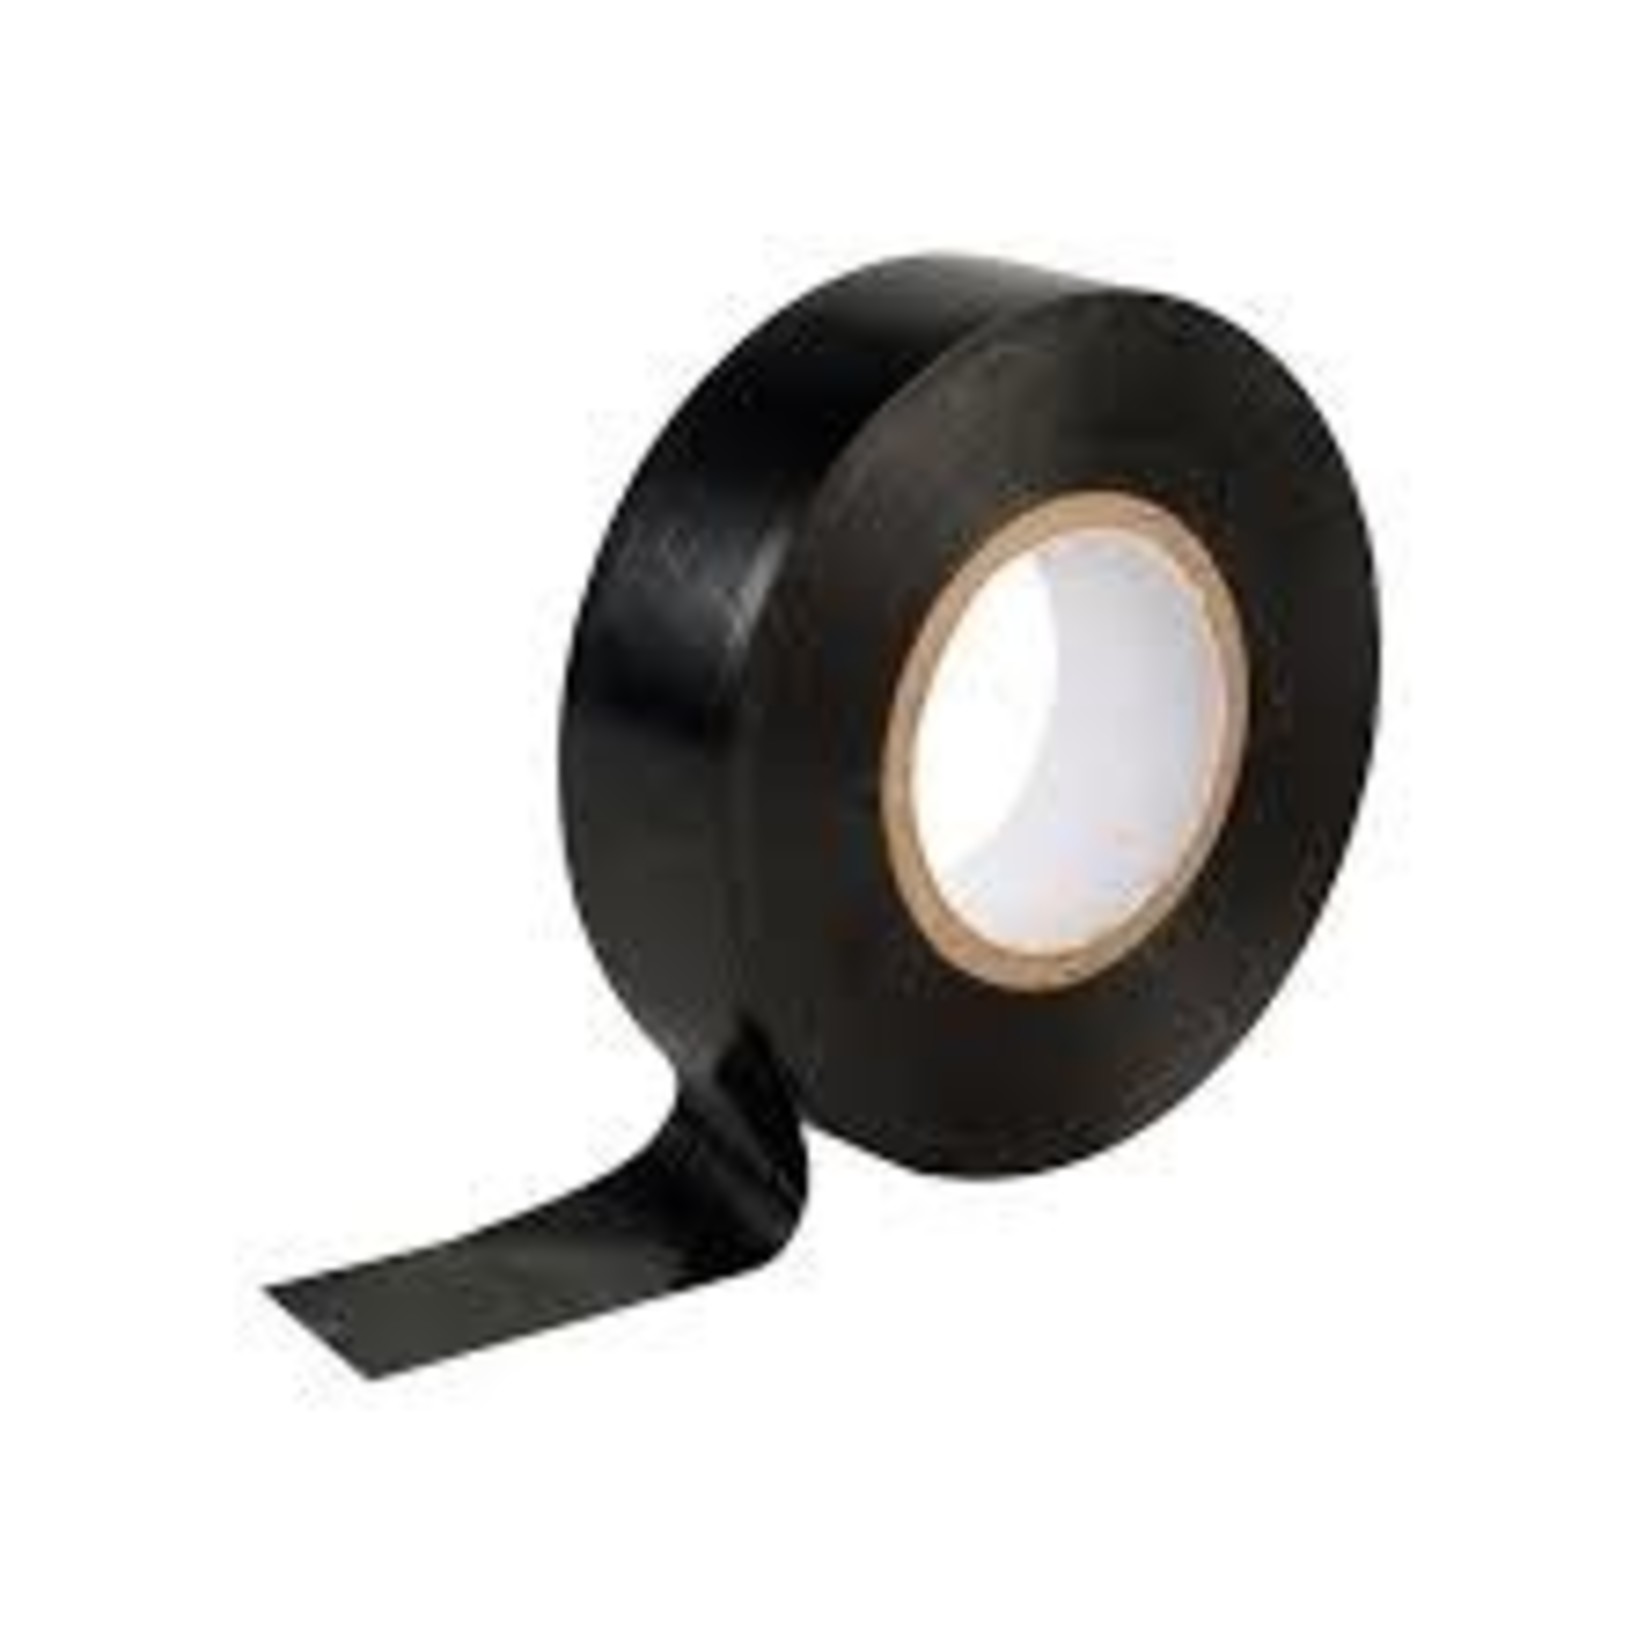 BLACK ELECTRICAL TAPE